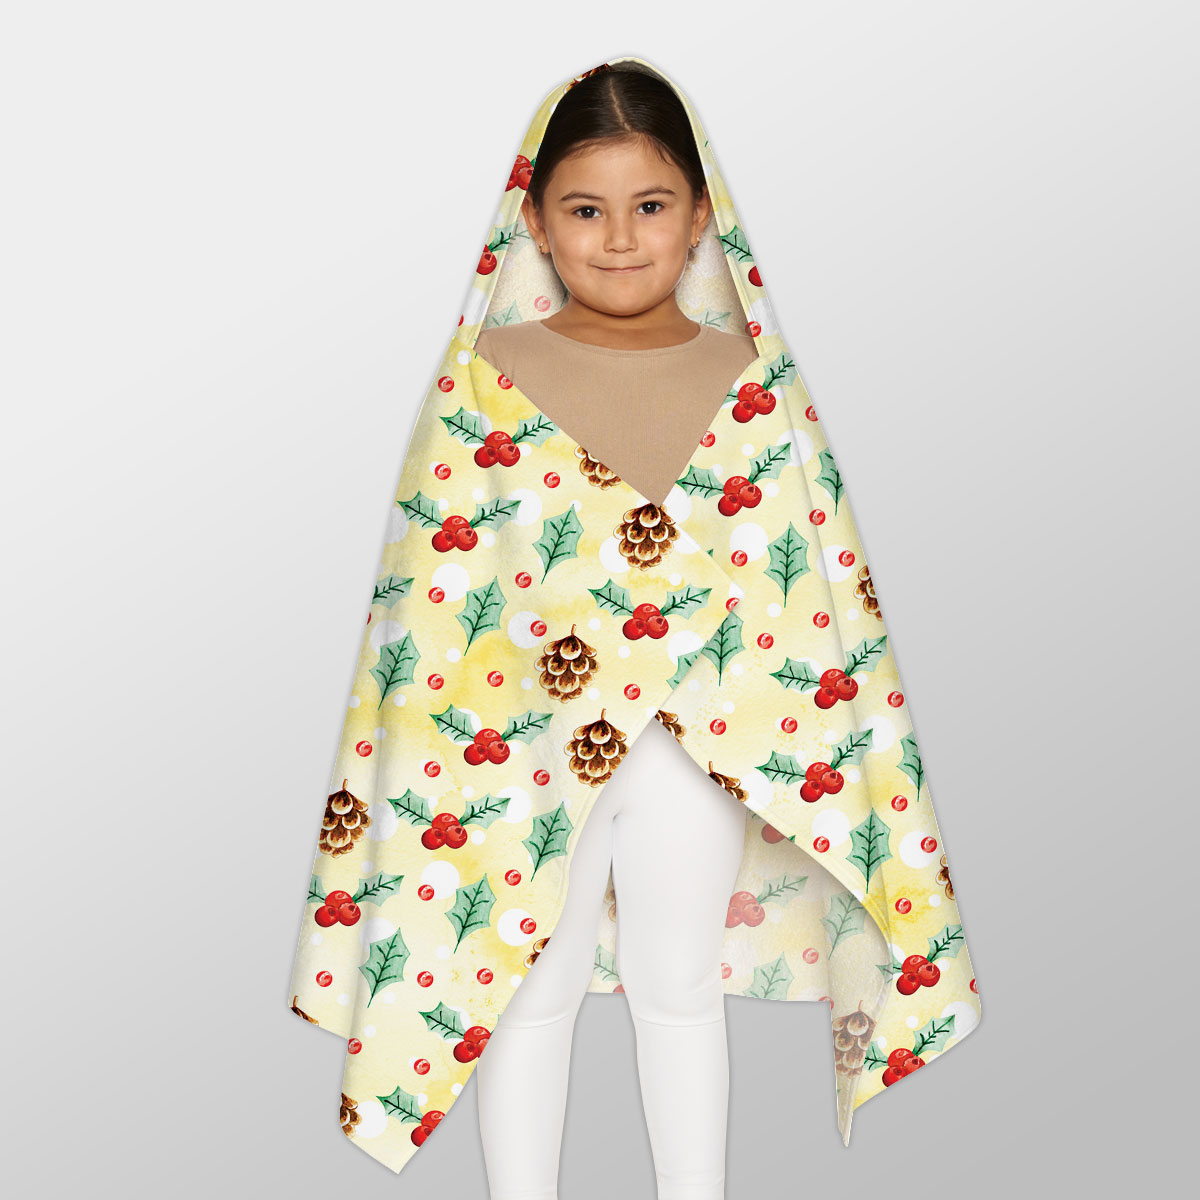 Holly Leaf, Pine Cone, Holly Berry Youth Hooded Towel